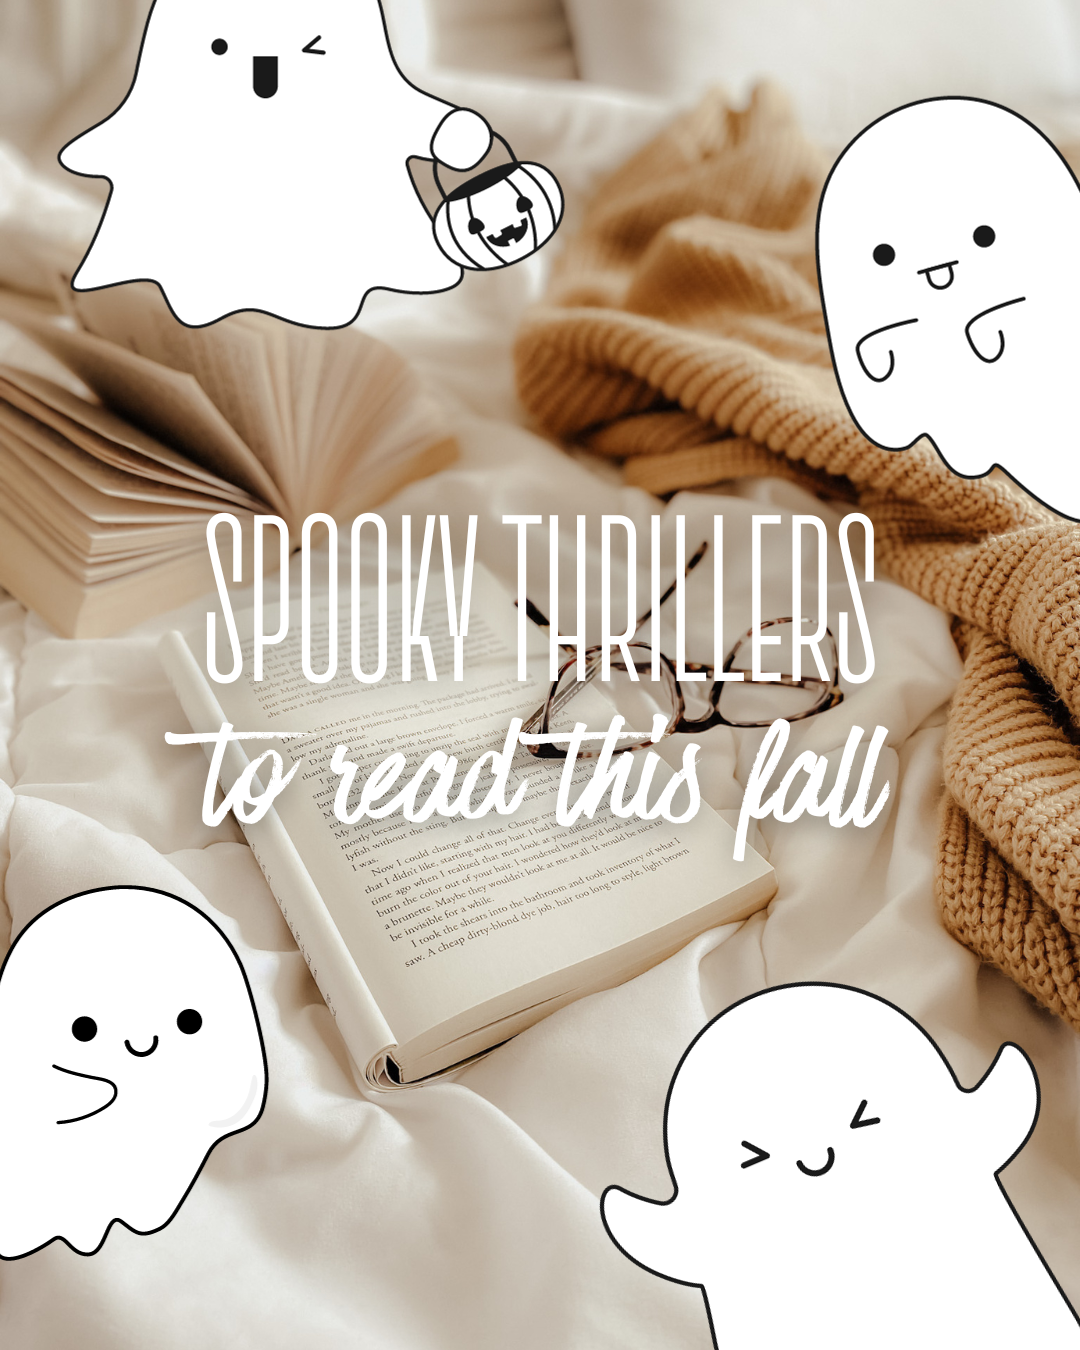 Spooky Thriller Books To Read This Fall.png